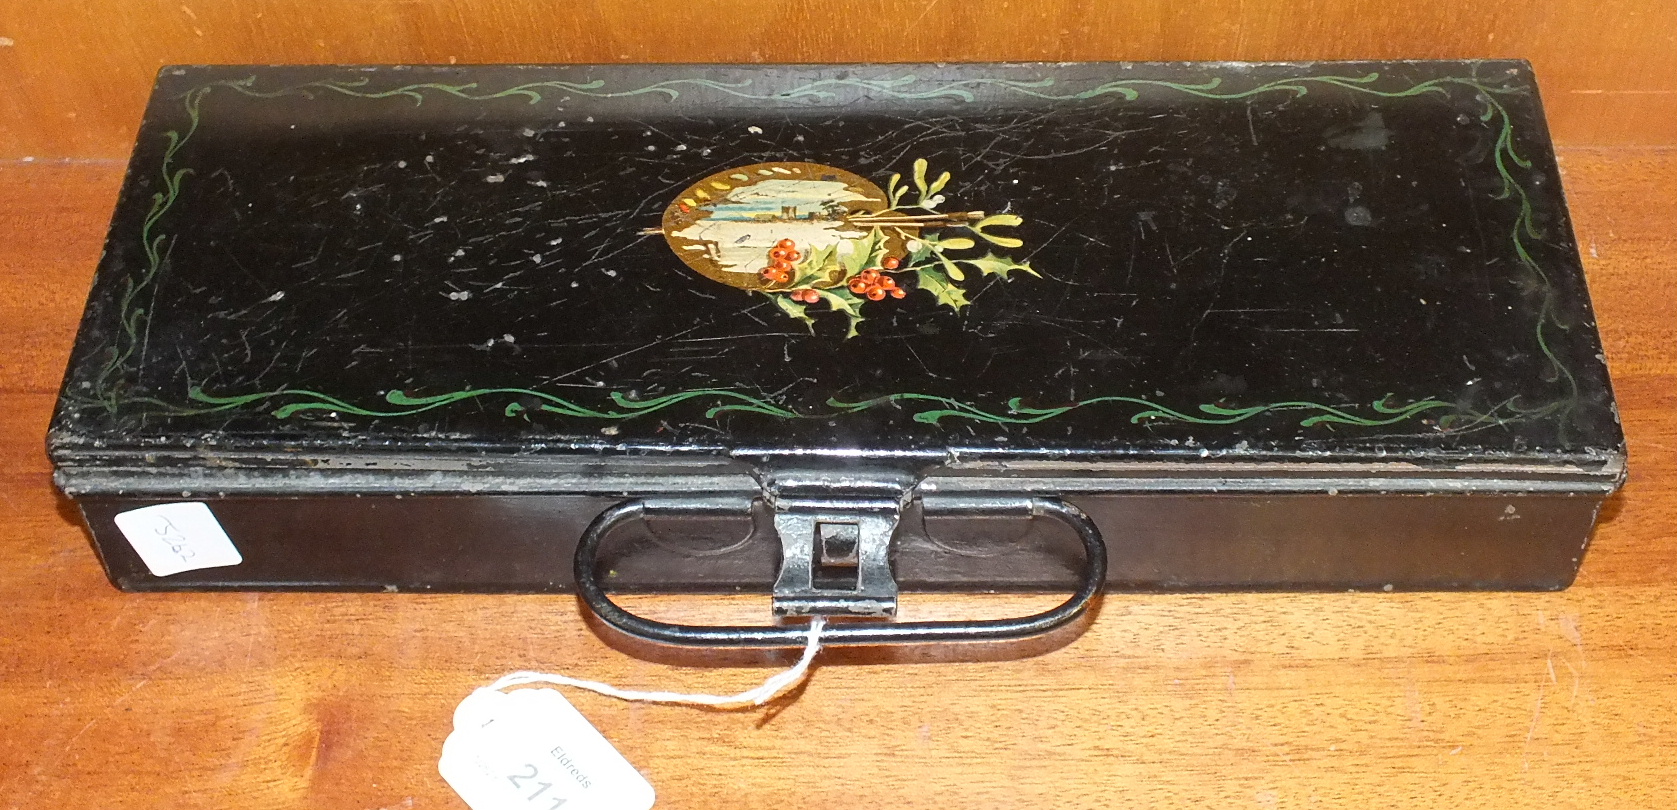 A Roberson & Co. japanned metal artist's paint box, the hinged lid opening to reveal a wooden hinged